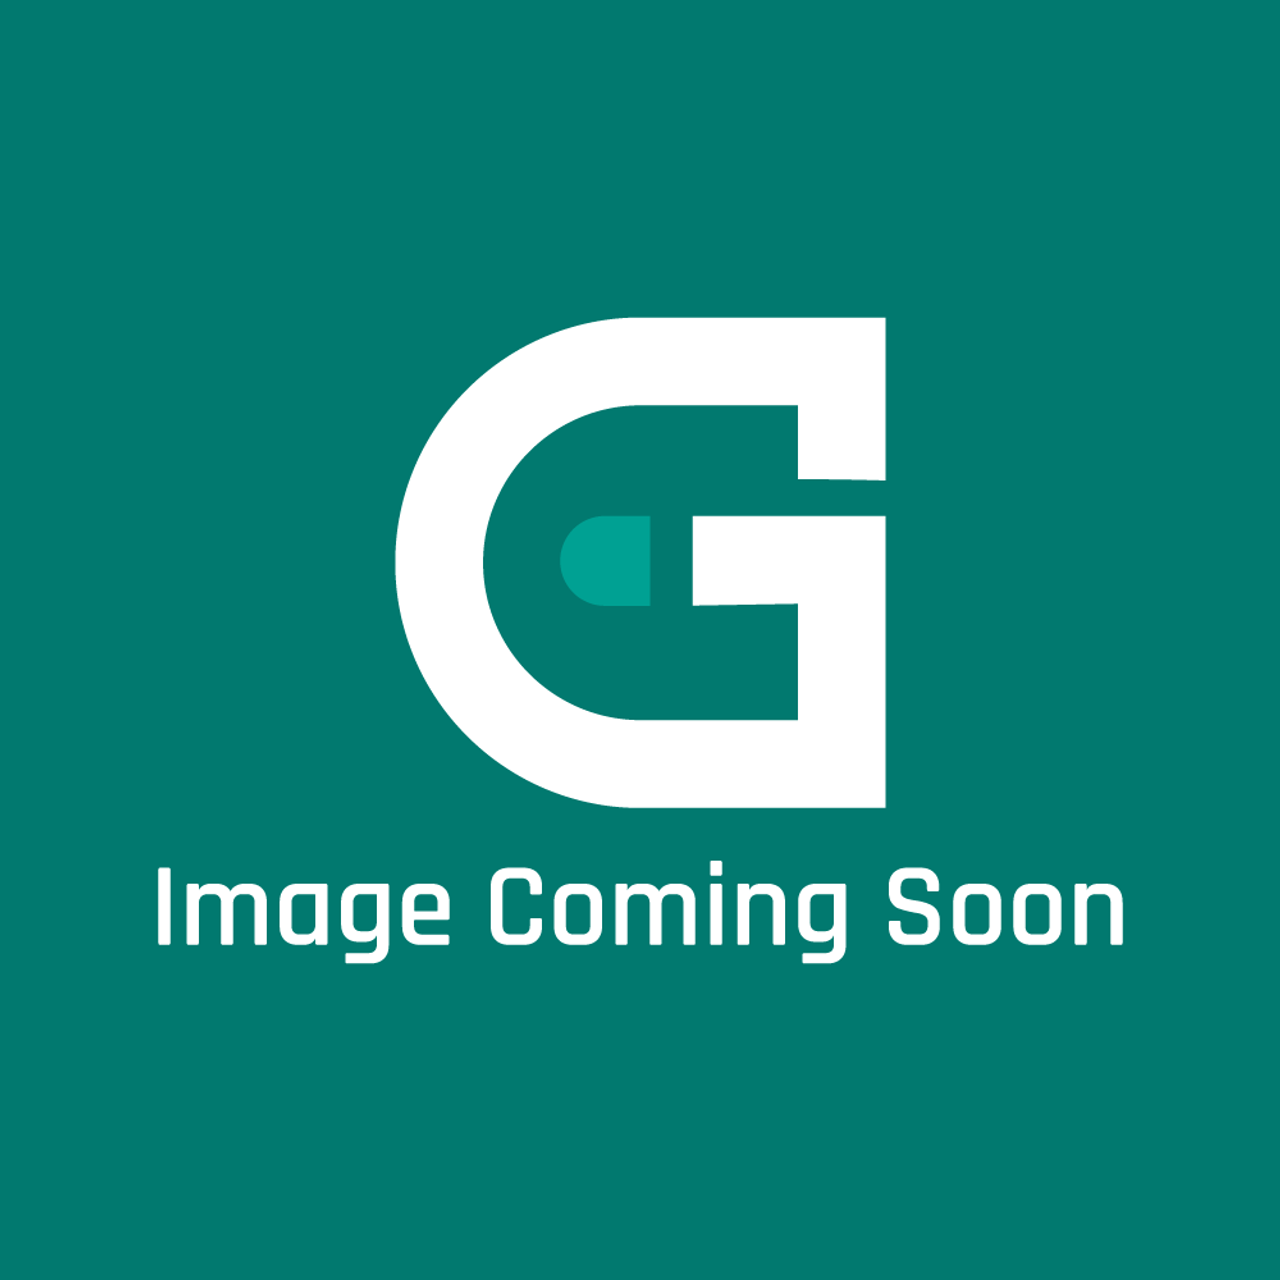 Frigidaire - Electrolux 140126193014 Spacer - Image Coming Soon!